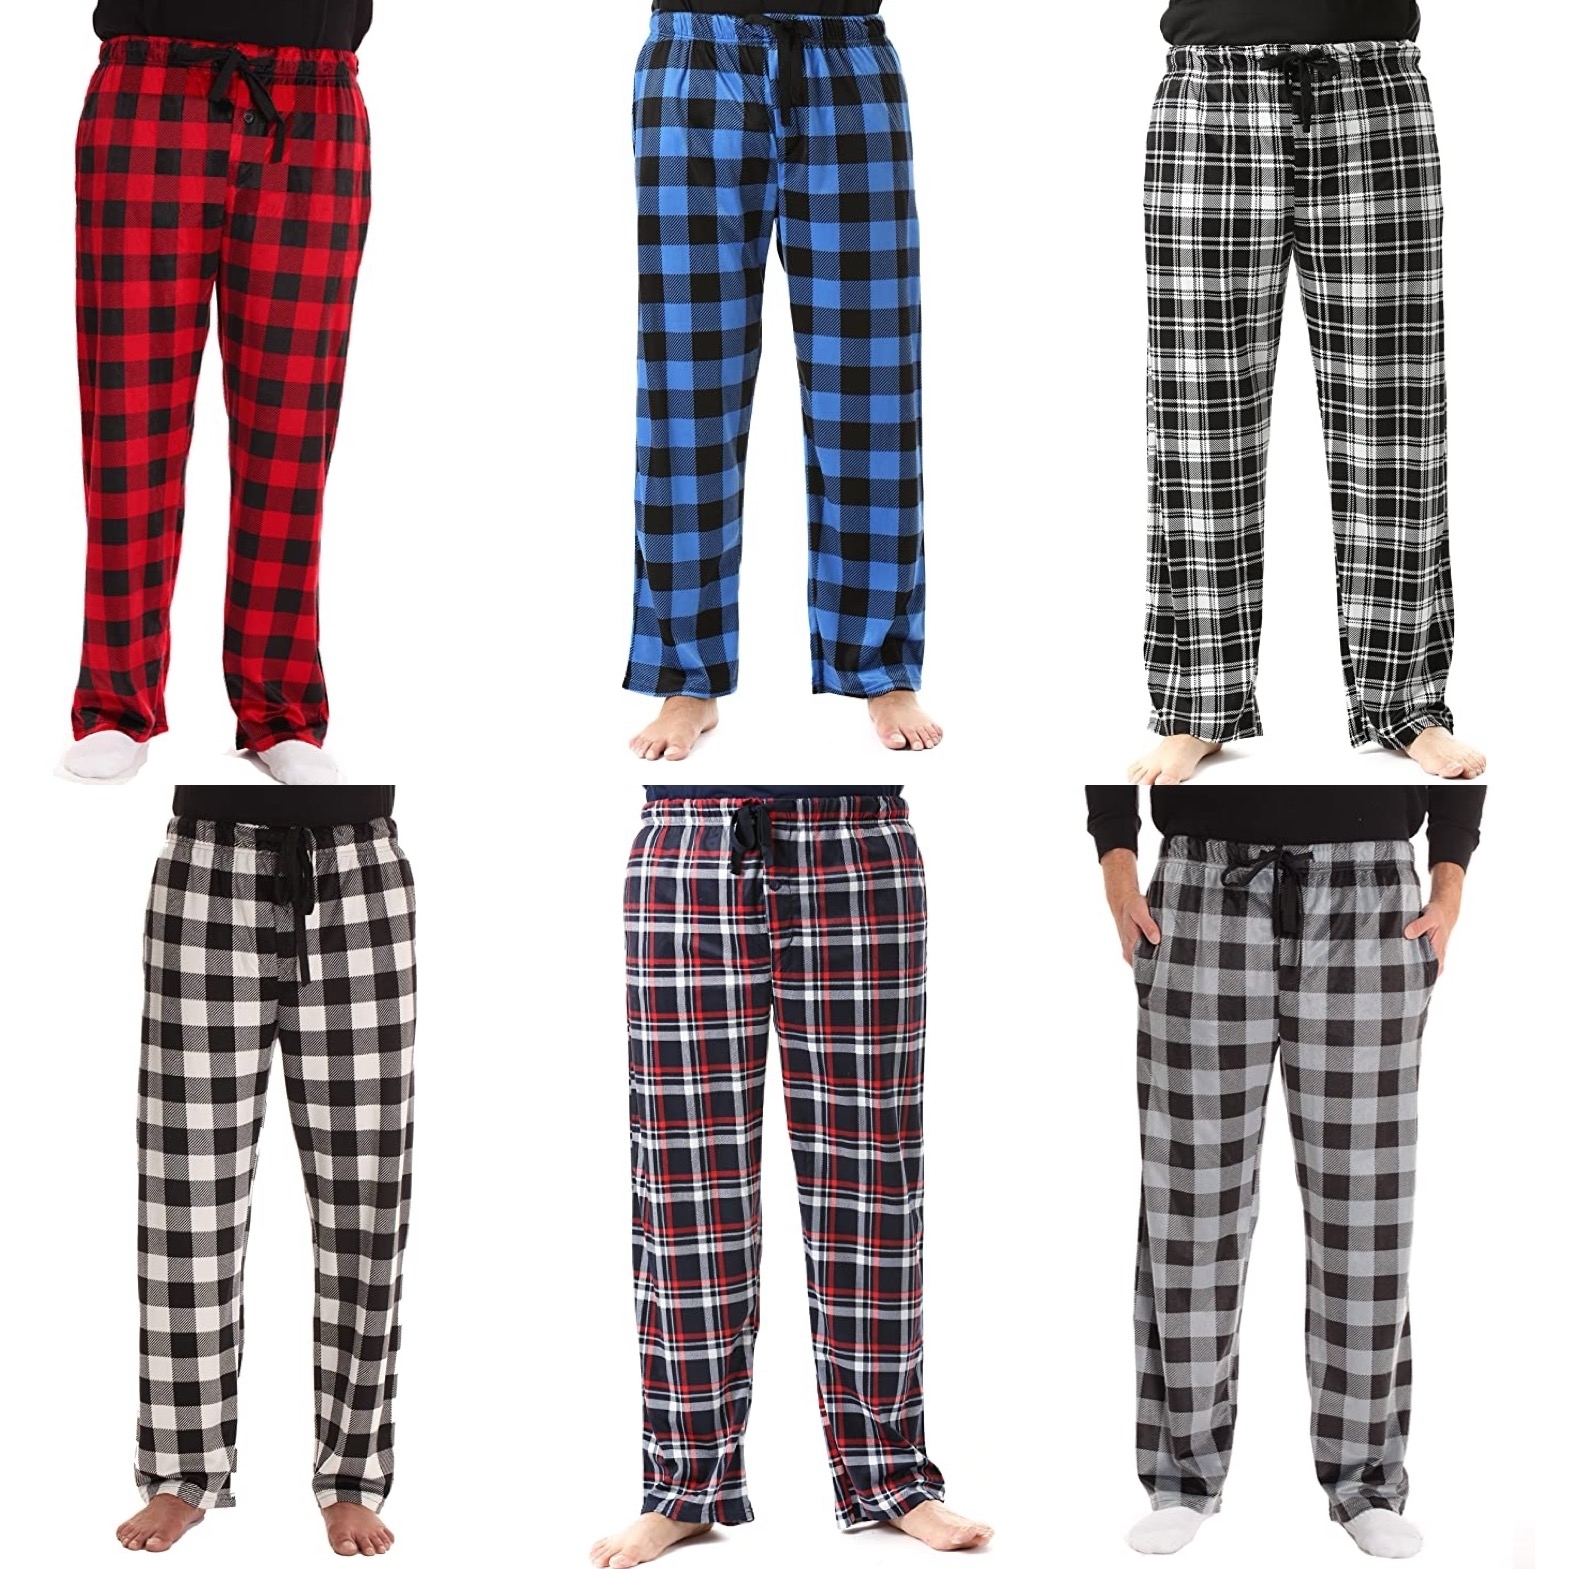 Multi-Pack: Men's Ultra Soft Flannel Plaid Pajama Lounge Pants - 3-Pack, Small